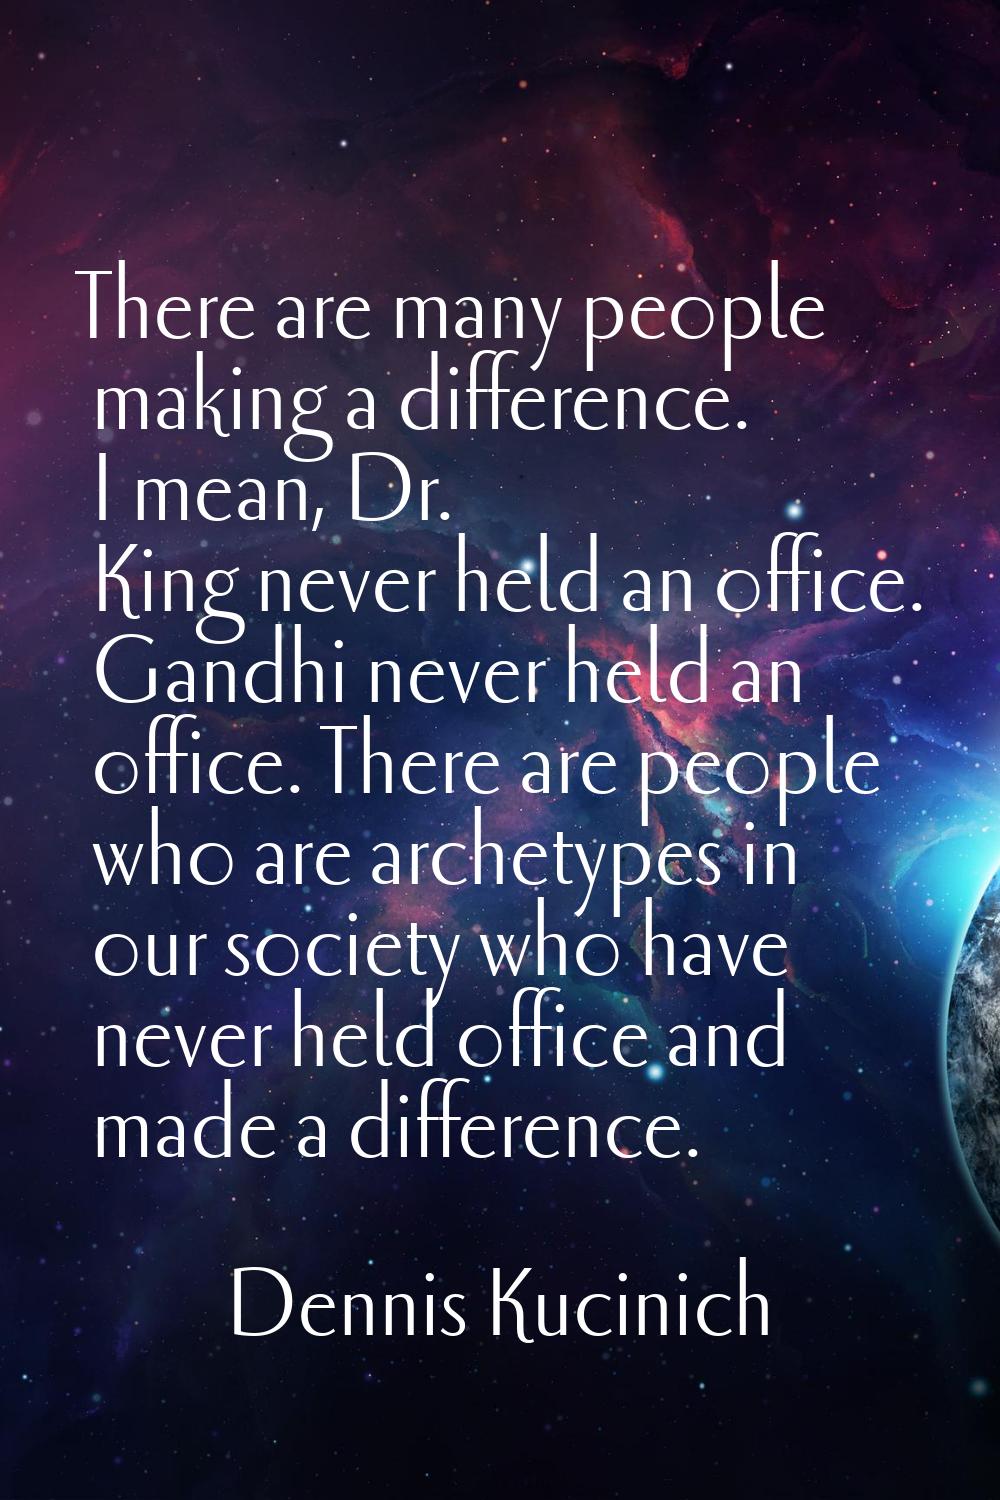 There are many people making a difference. I mean, Dr. King never held an office. Gandhi never held